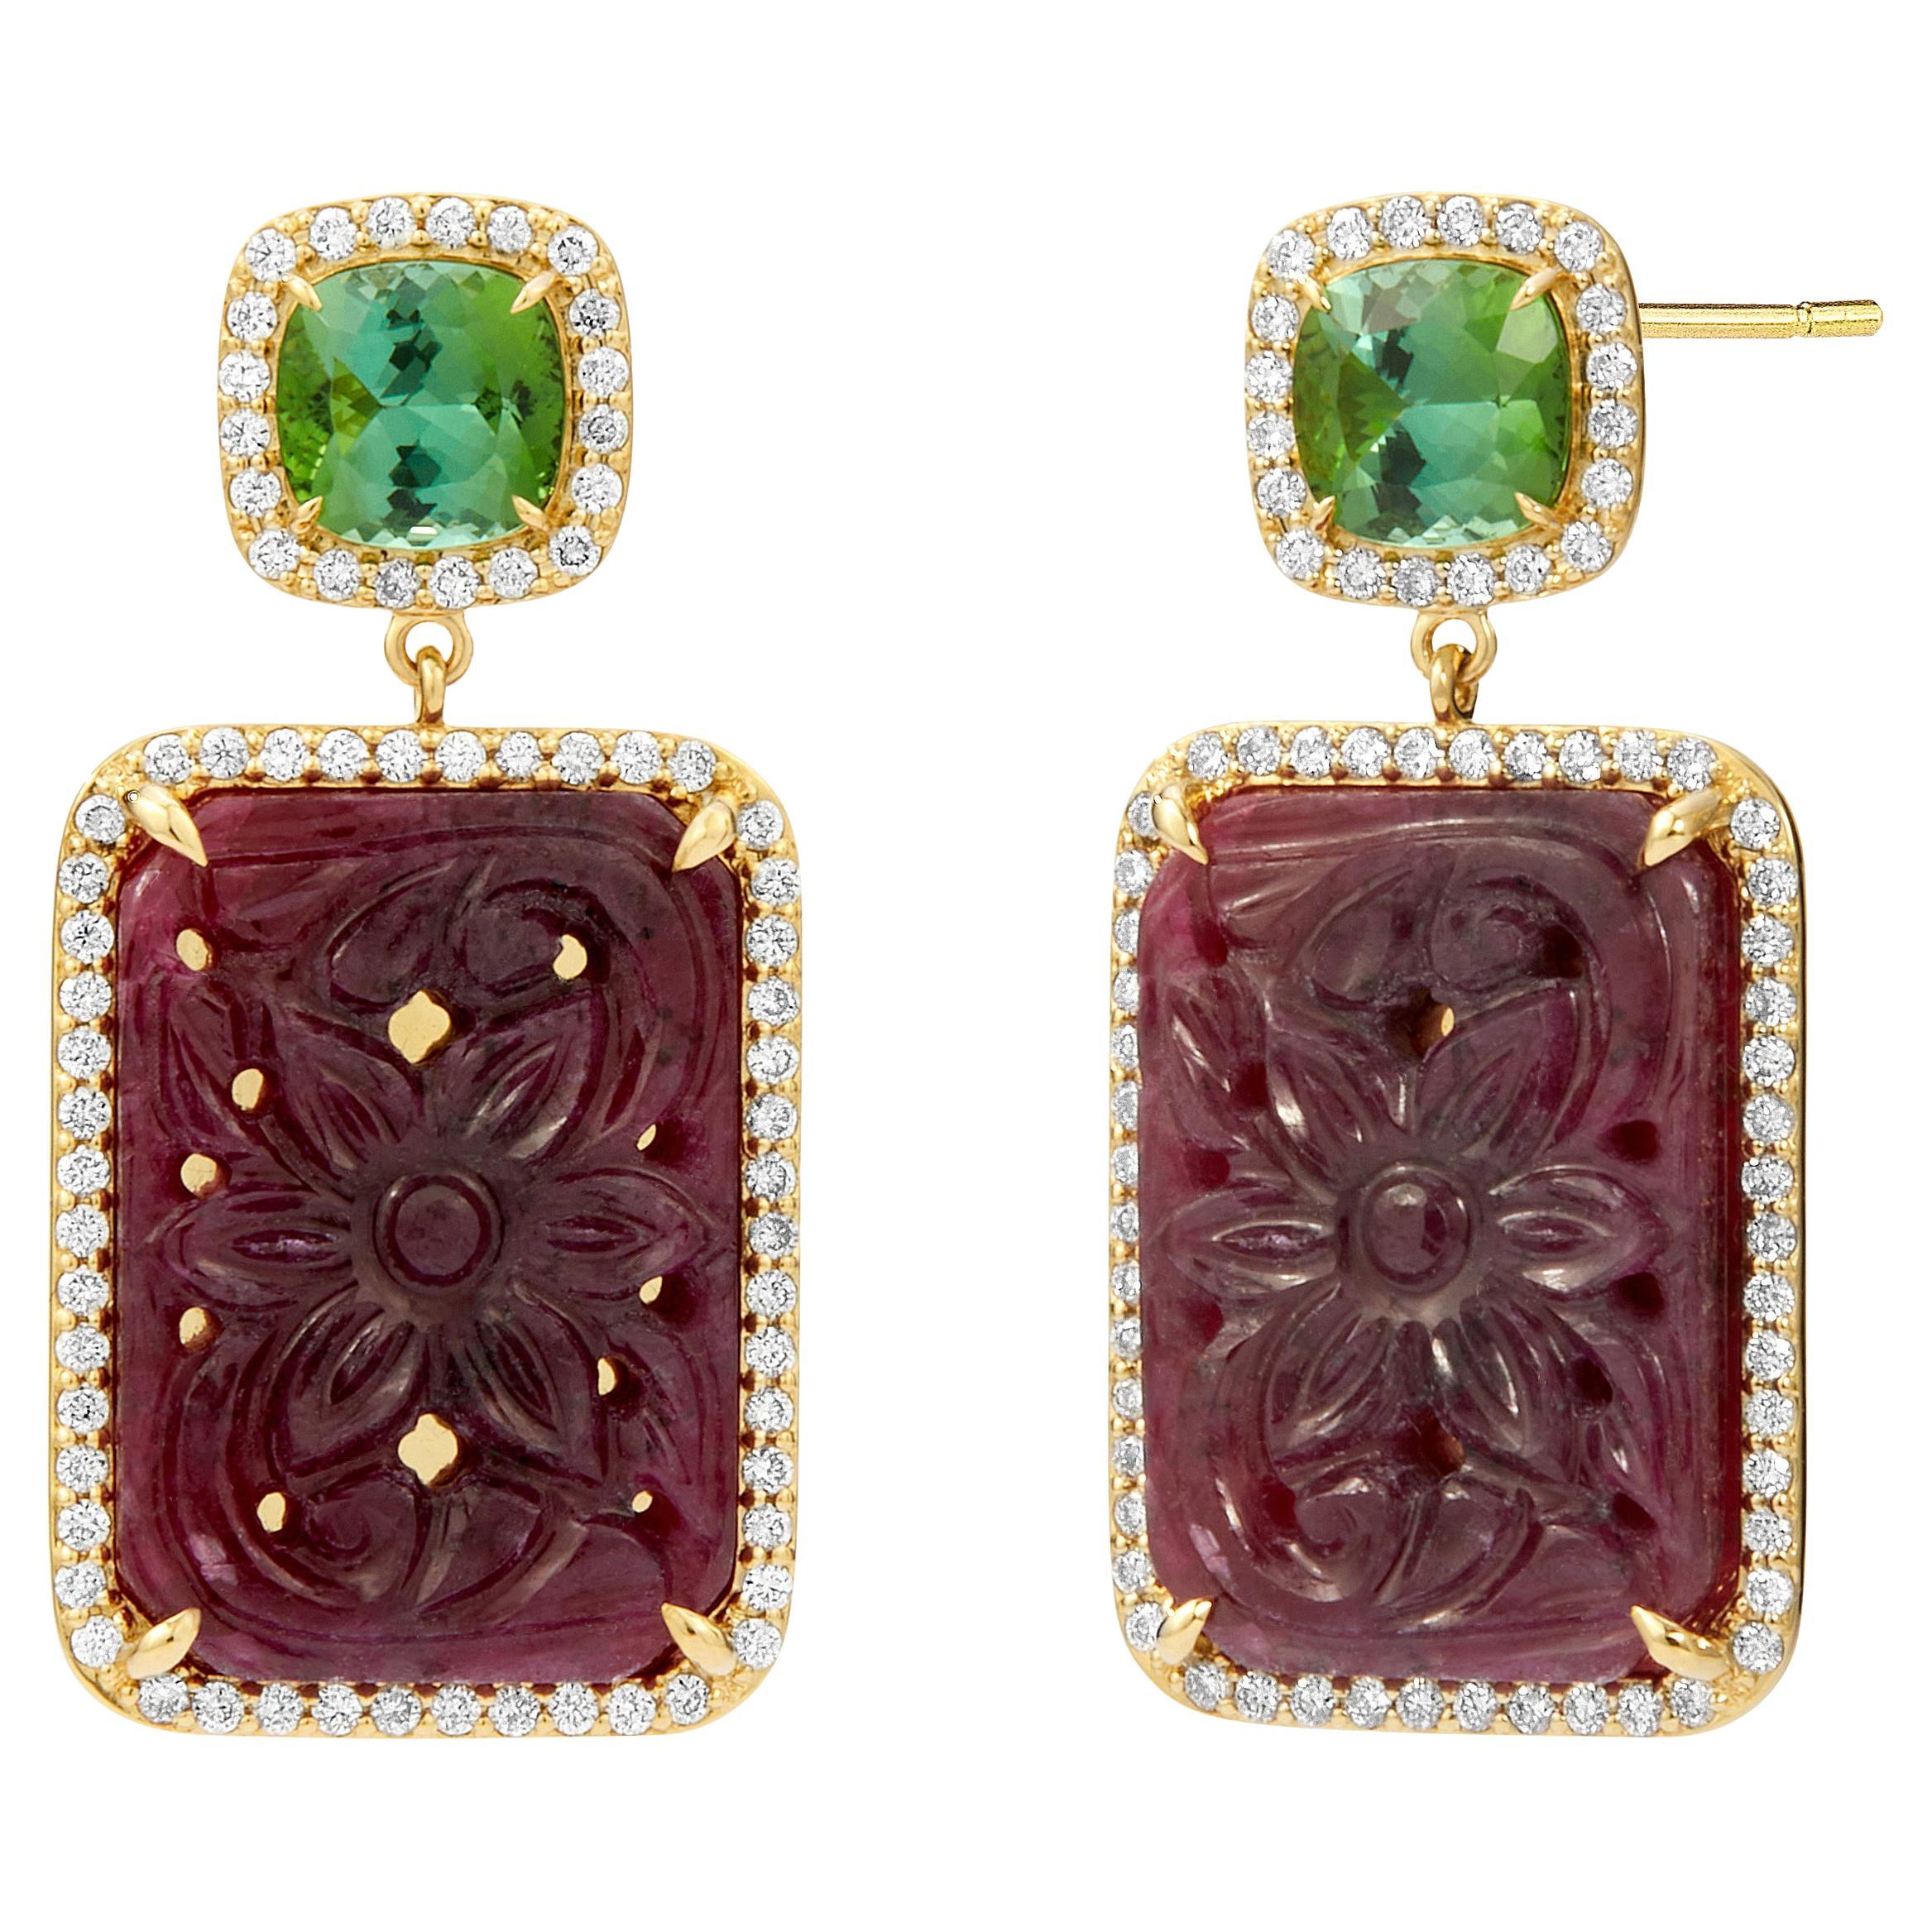 Syna Yellow Gold Limited Edition Green Tourmaline, Rubies and Diamond Earrings